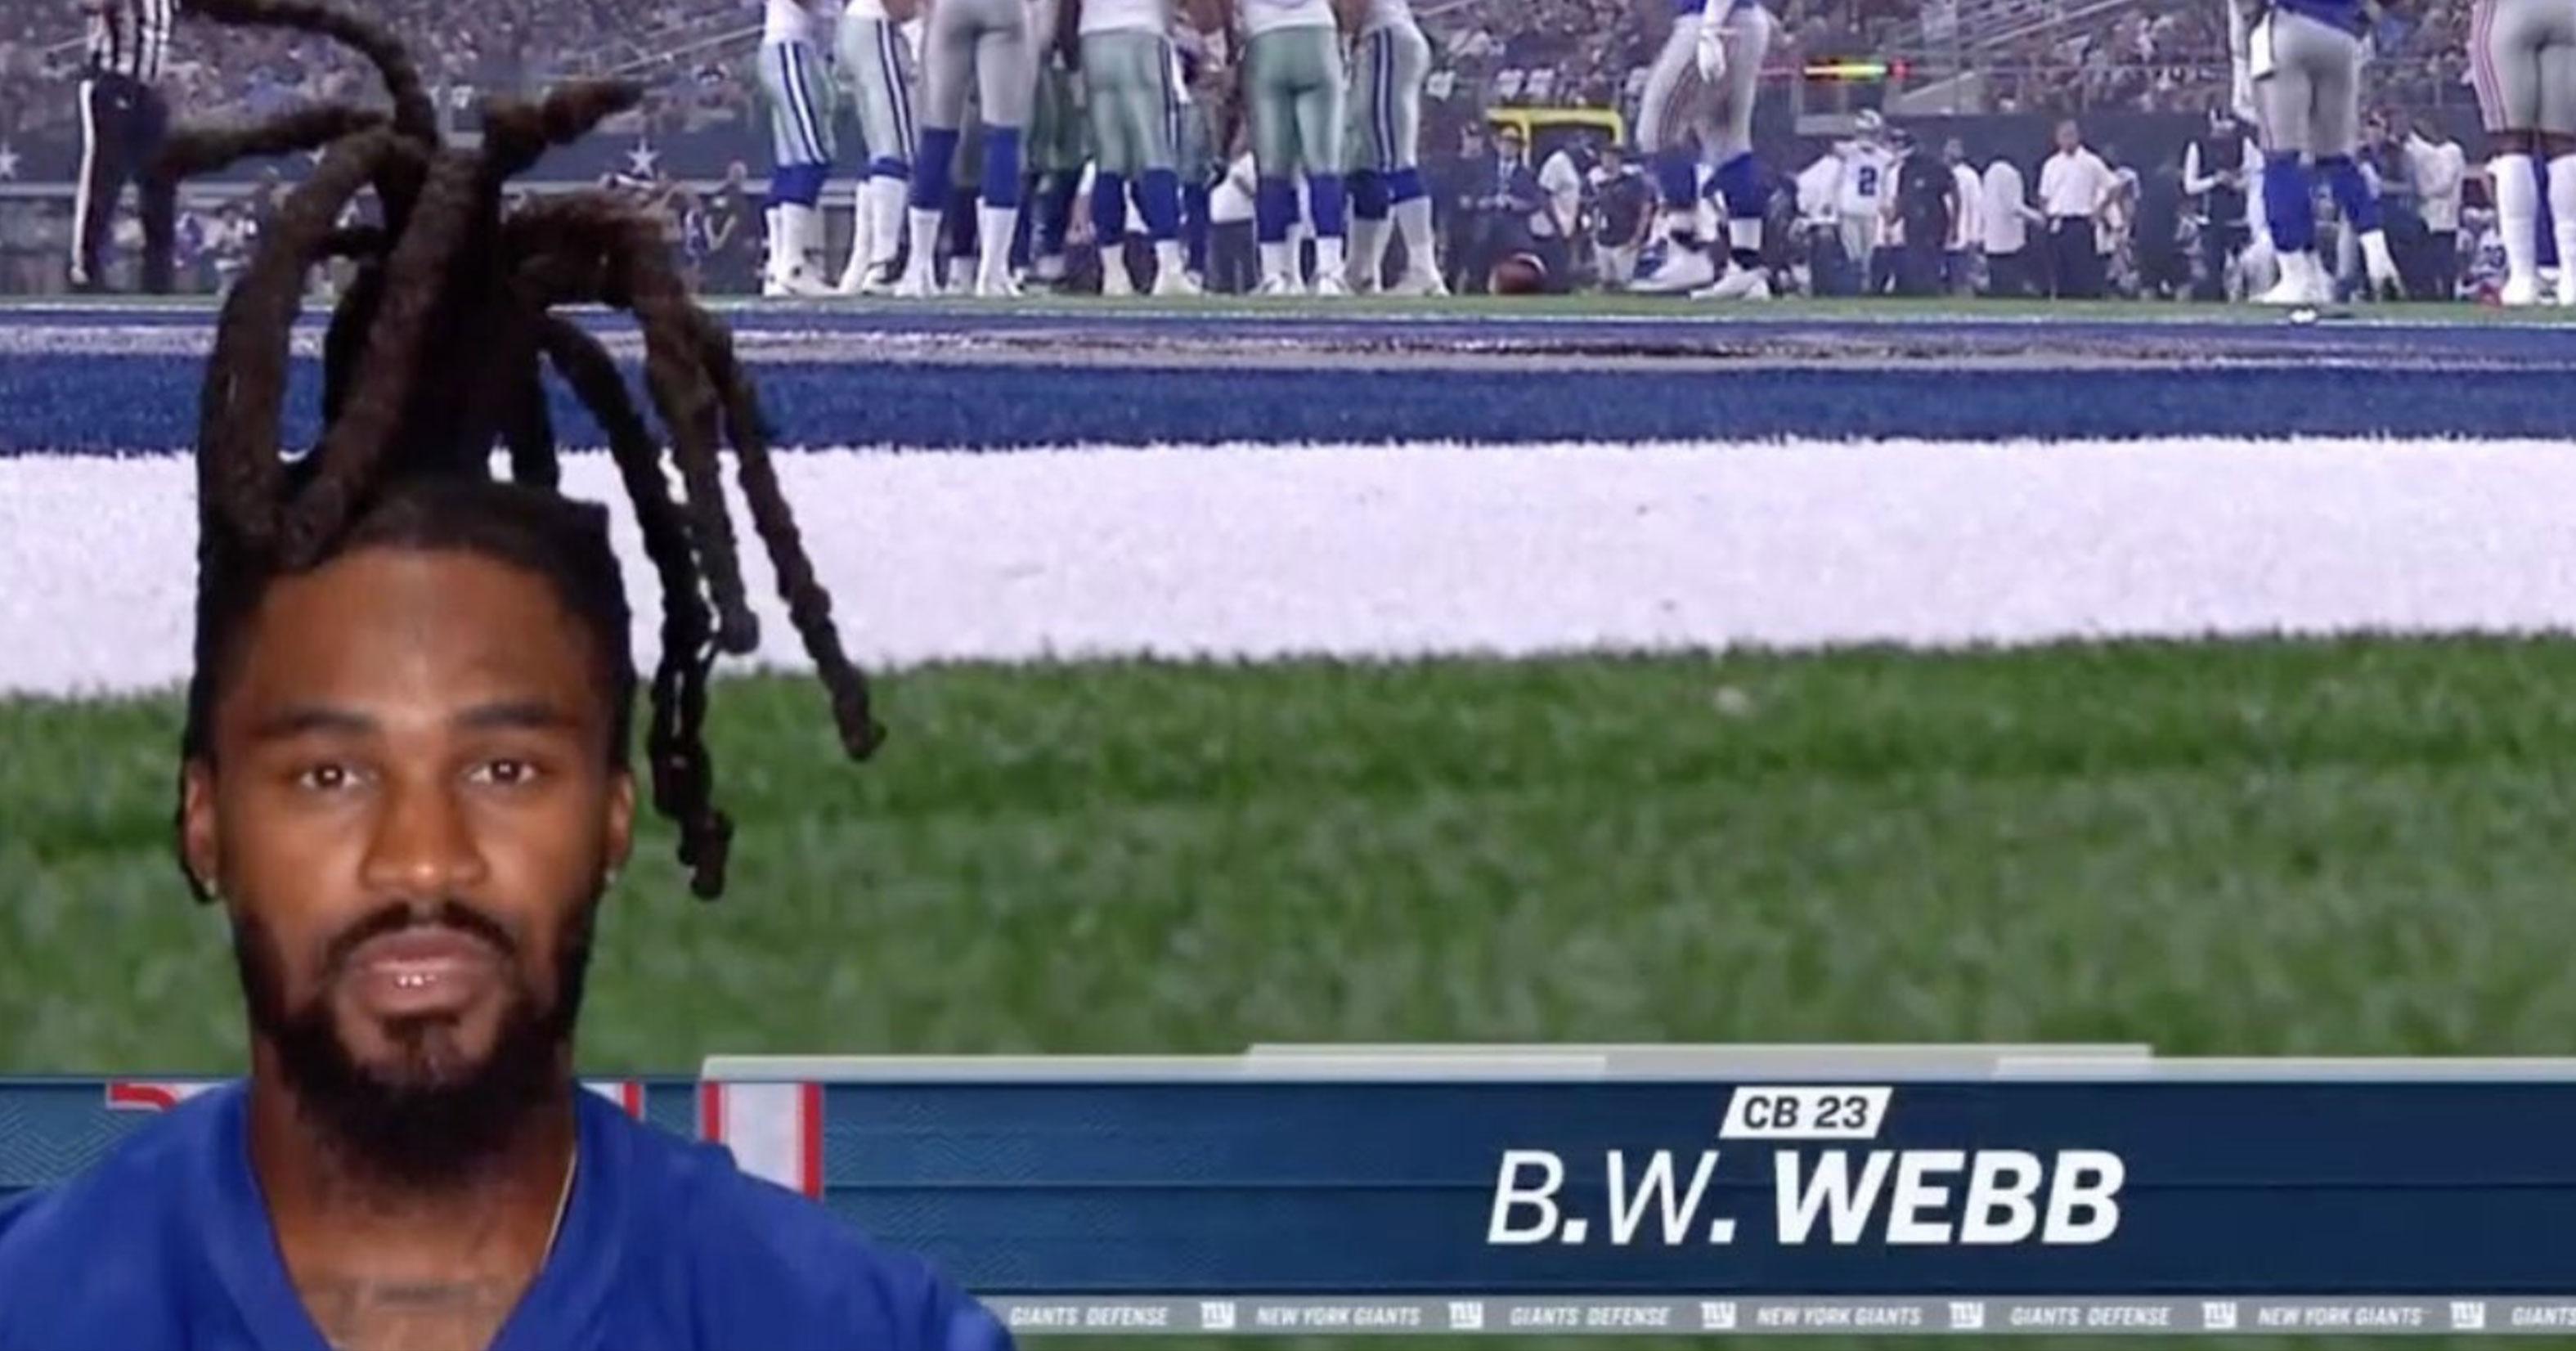 Giants Cornerback B.W. Webb Gets Roasted On Twitter For His Hair